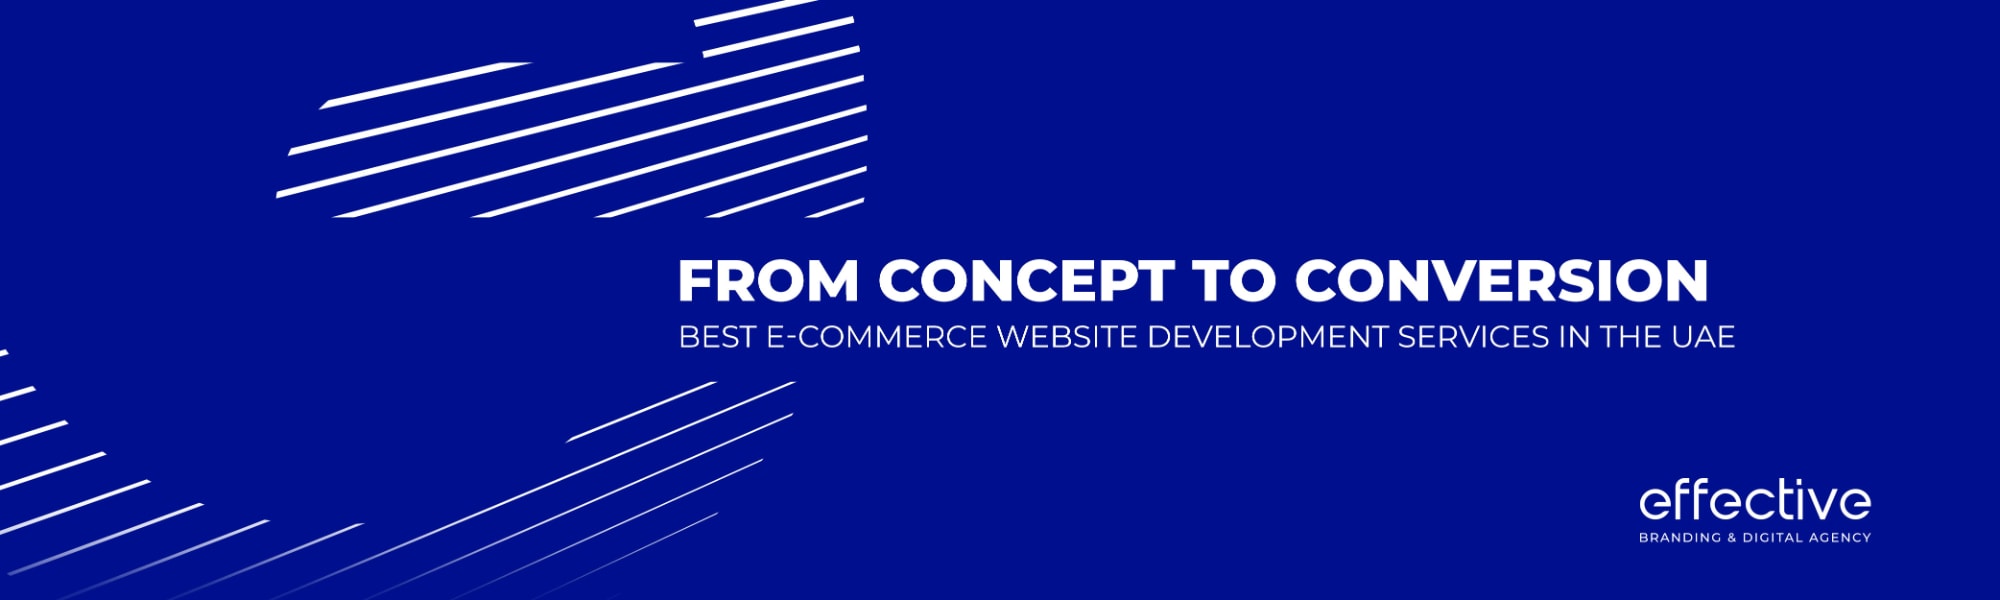 From Concept to Conversion Best E-Commerce Website Development Services in the UAE